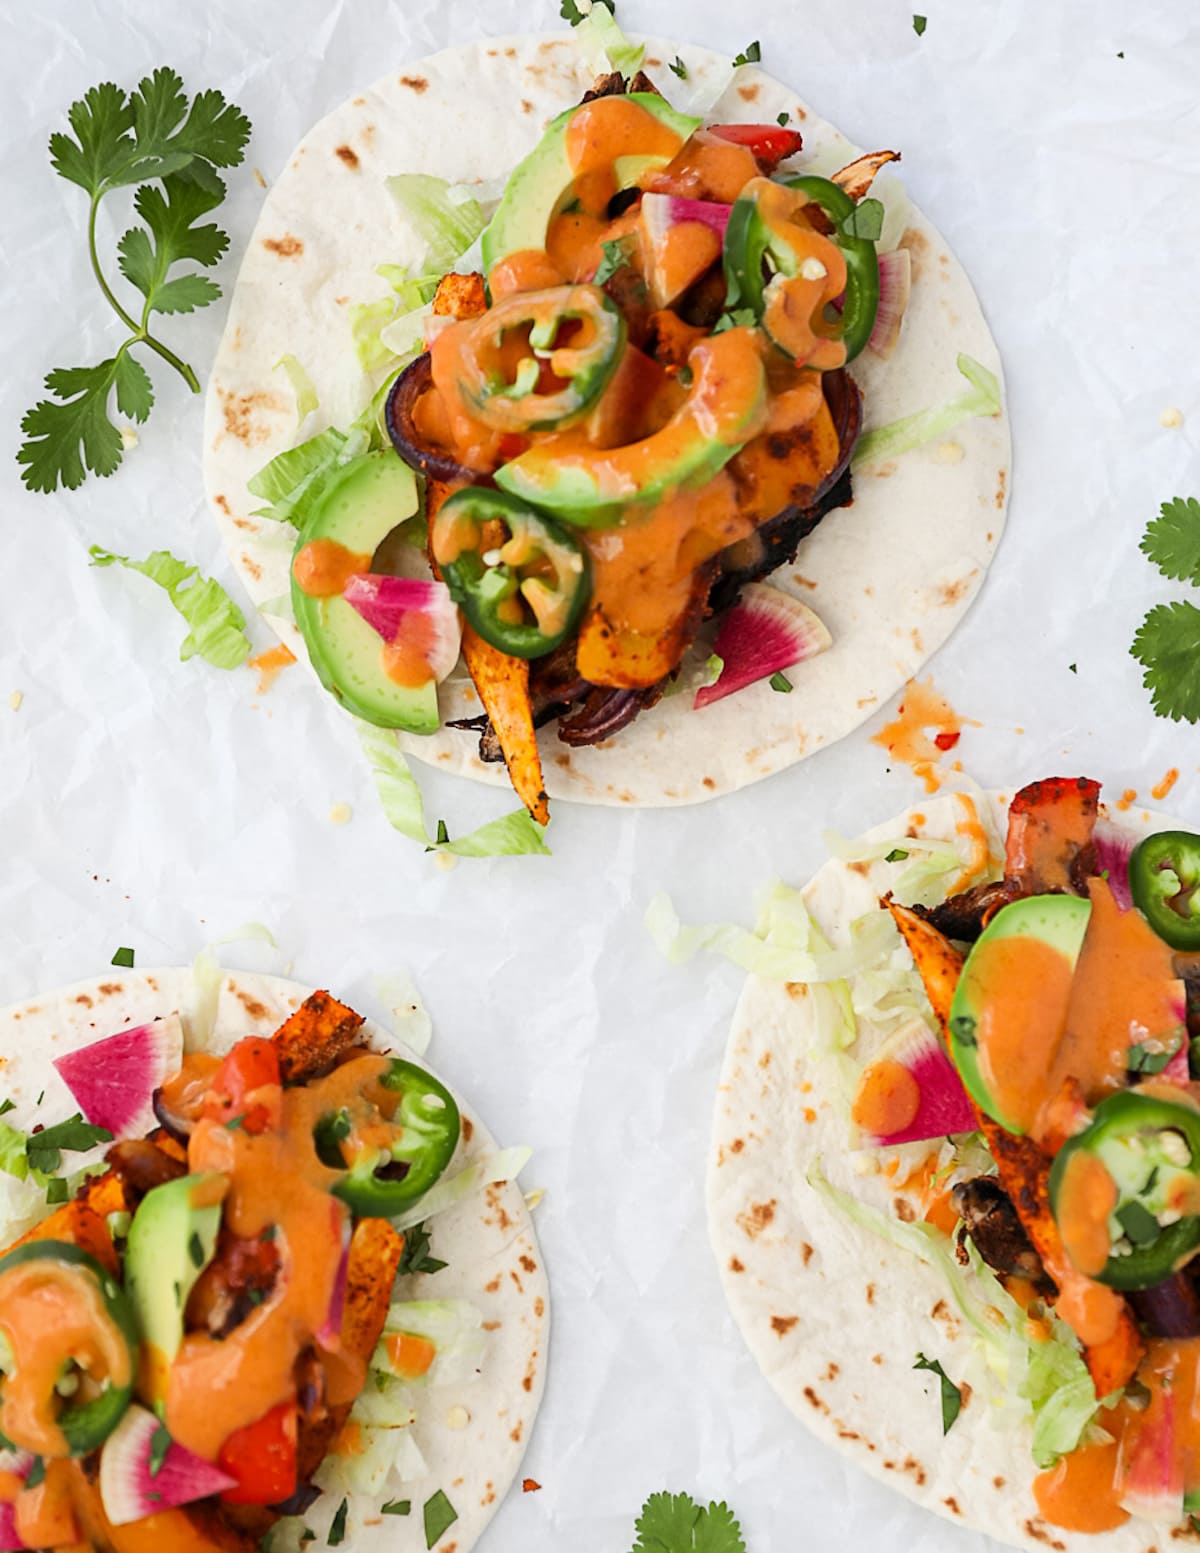 Three tacos on white tortillas with roasted and fresh vegetables and a creamy chipotle sauce